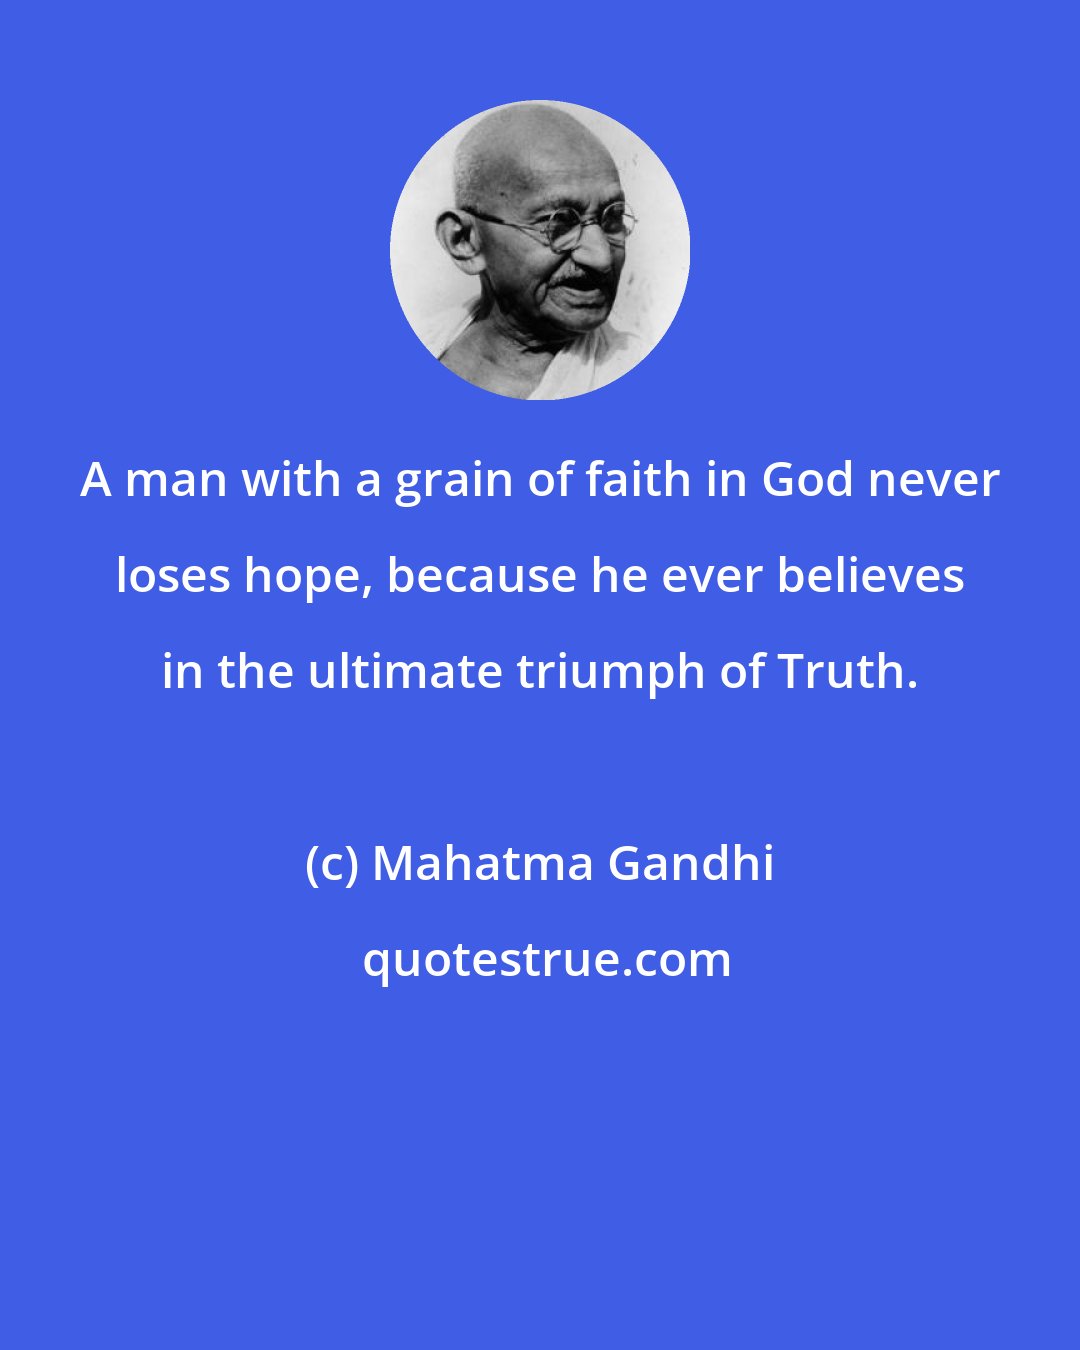 Mahatma Gandhi: A man with a grain of faith in God never loses hope, because he ever believes in the ultimate triumph of Truth.